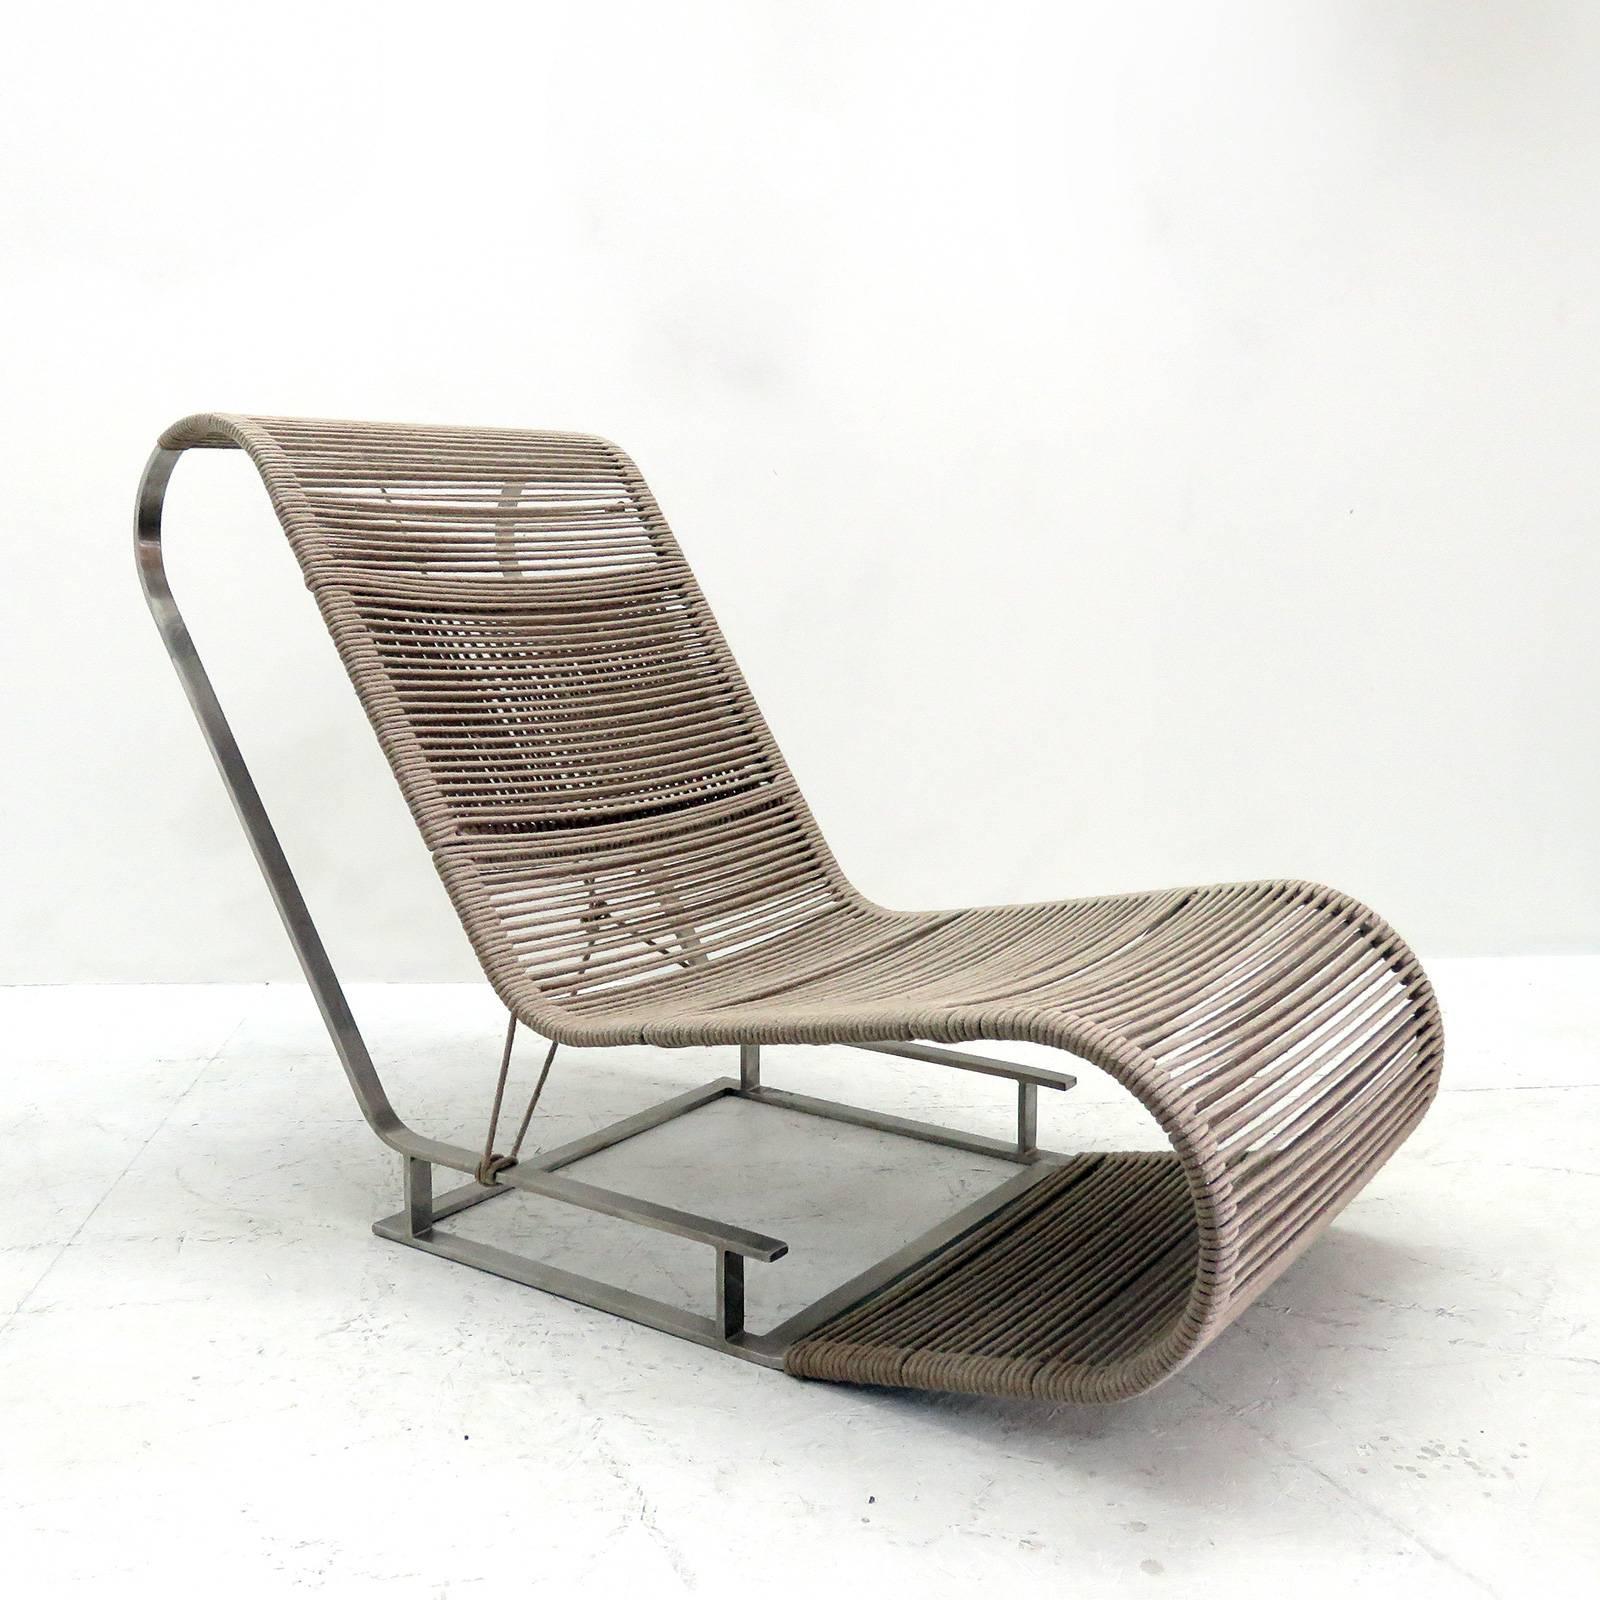 Unique easy chair designed by Ole Henriksen, with intricate natural linen rope weaving on a stainless steel frame, this piece is a fully functional prototype.